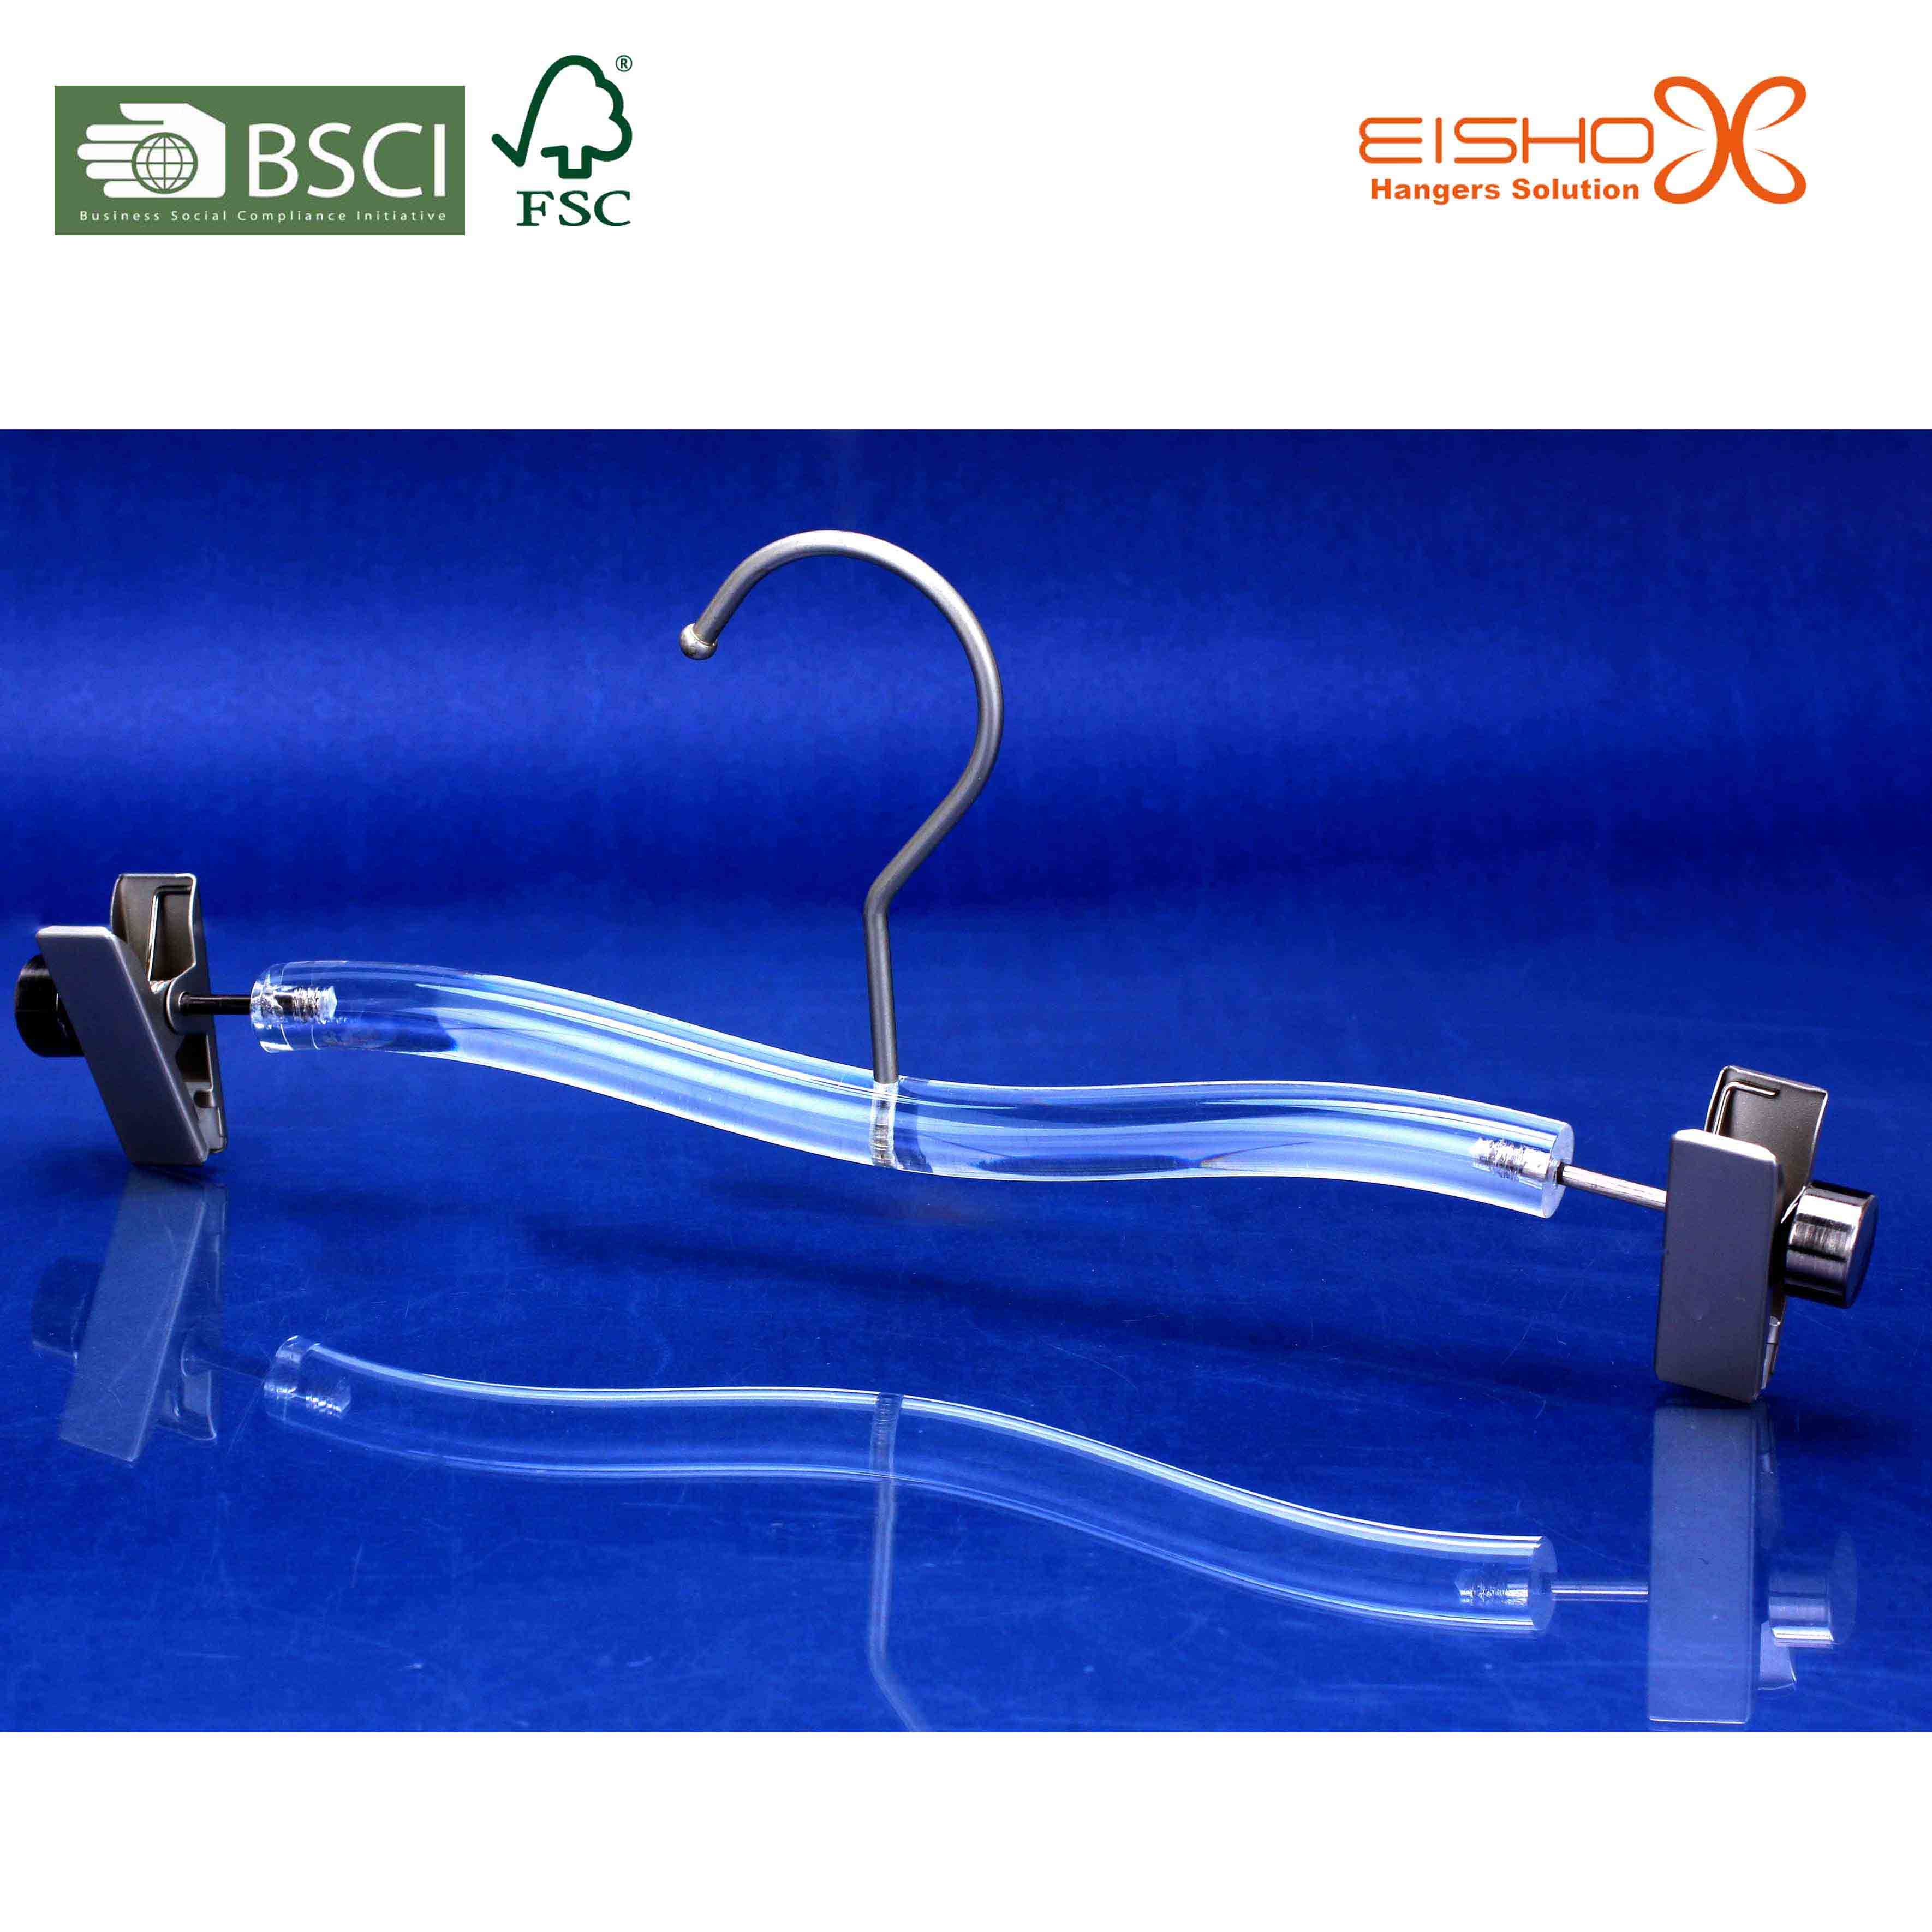 Deluxe Acrylic Pants Hanger for Clothes Display